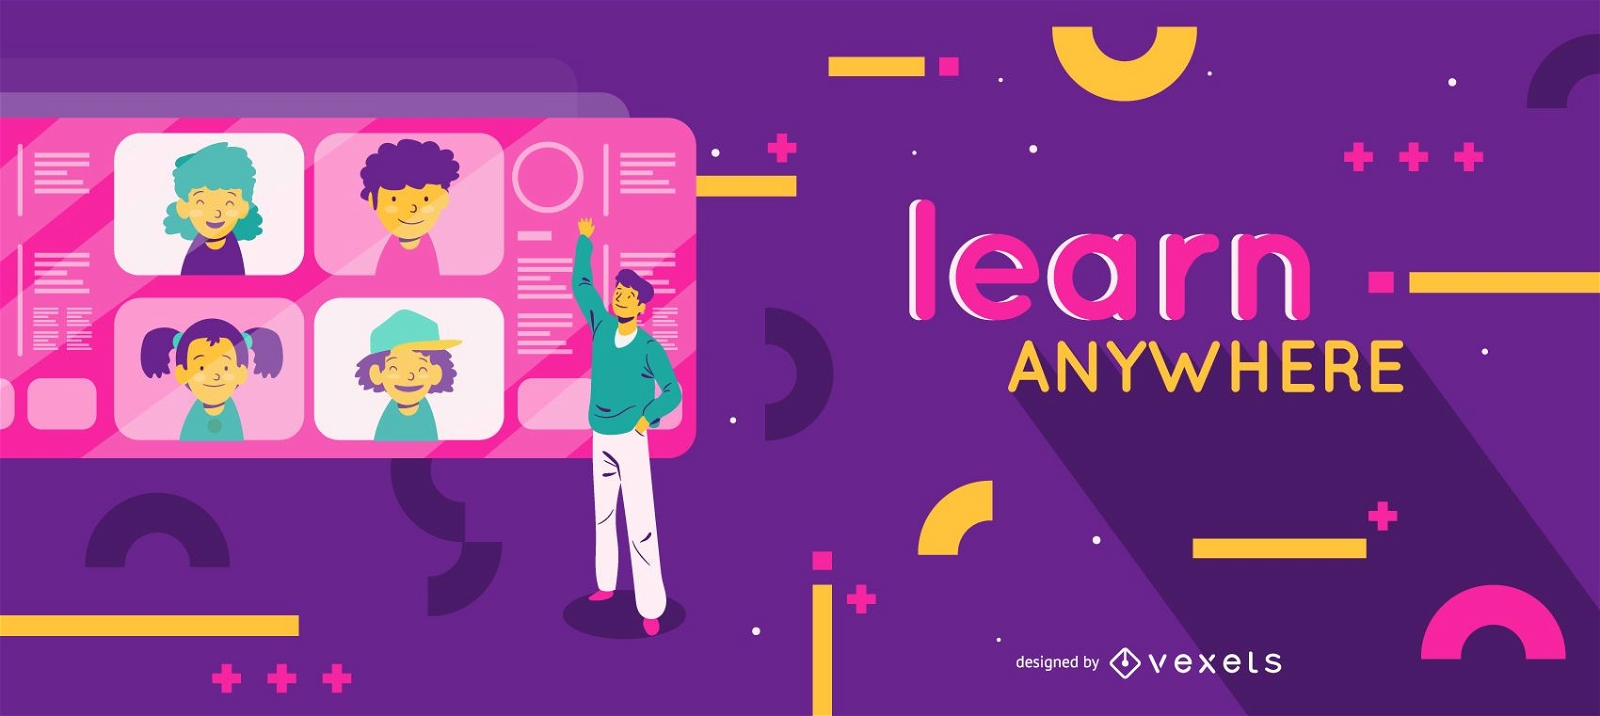 Learn anywhere education slider template